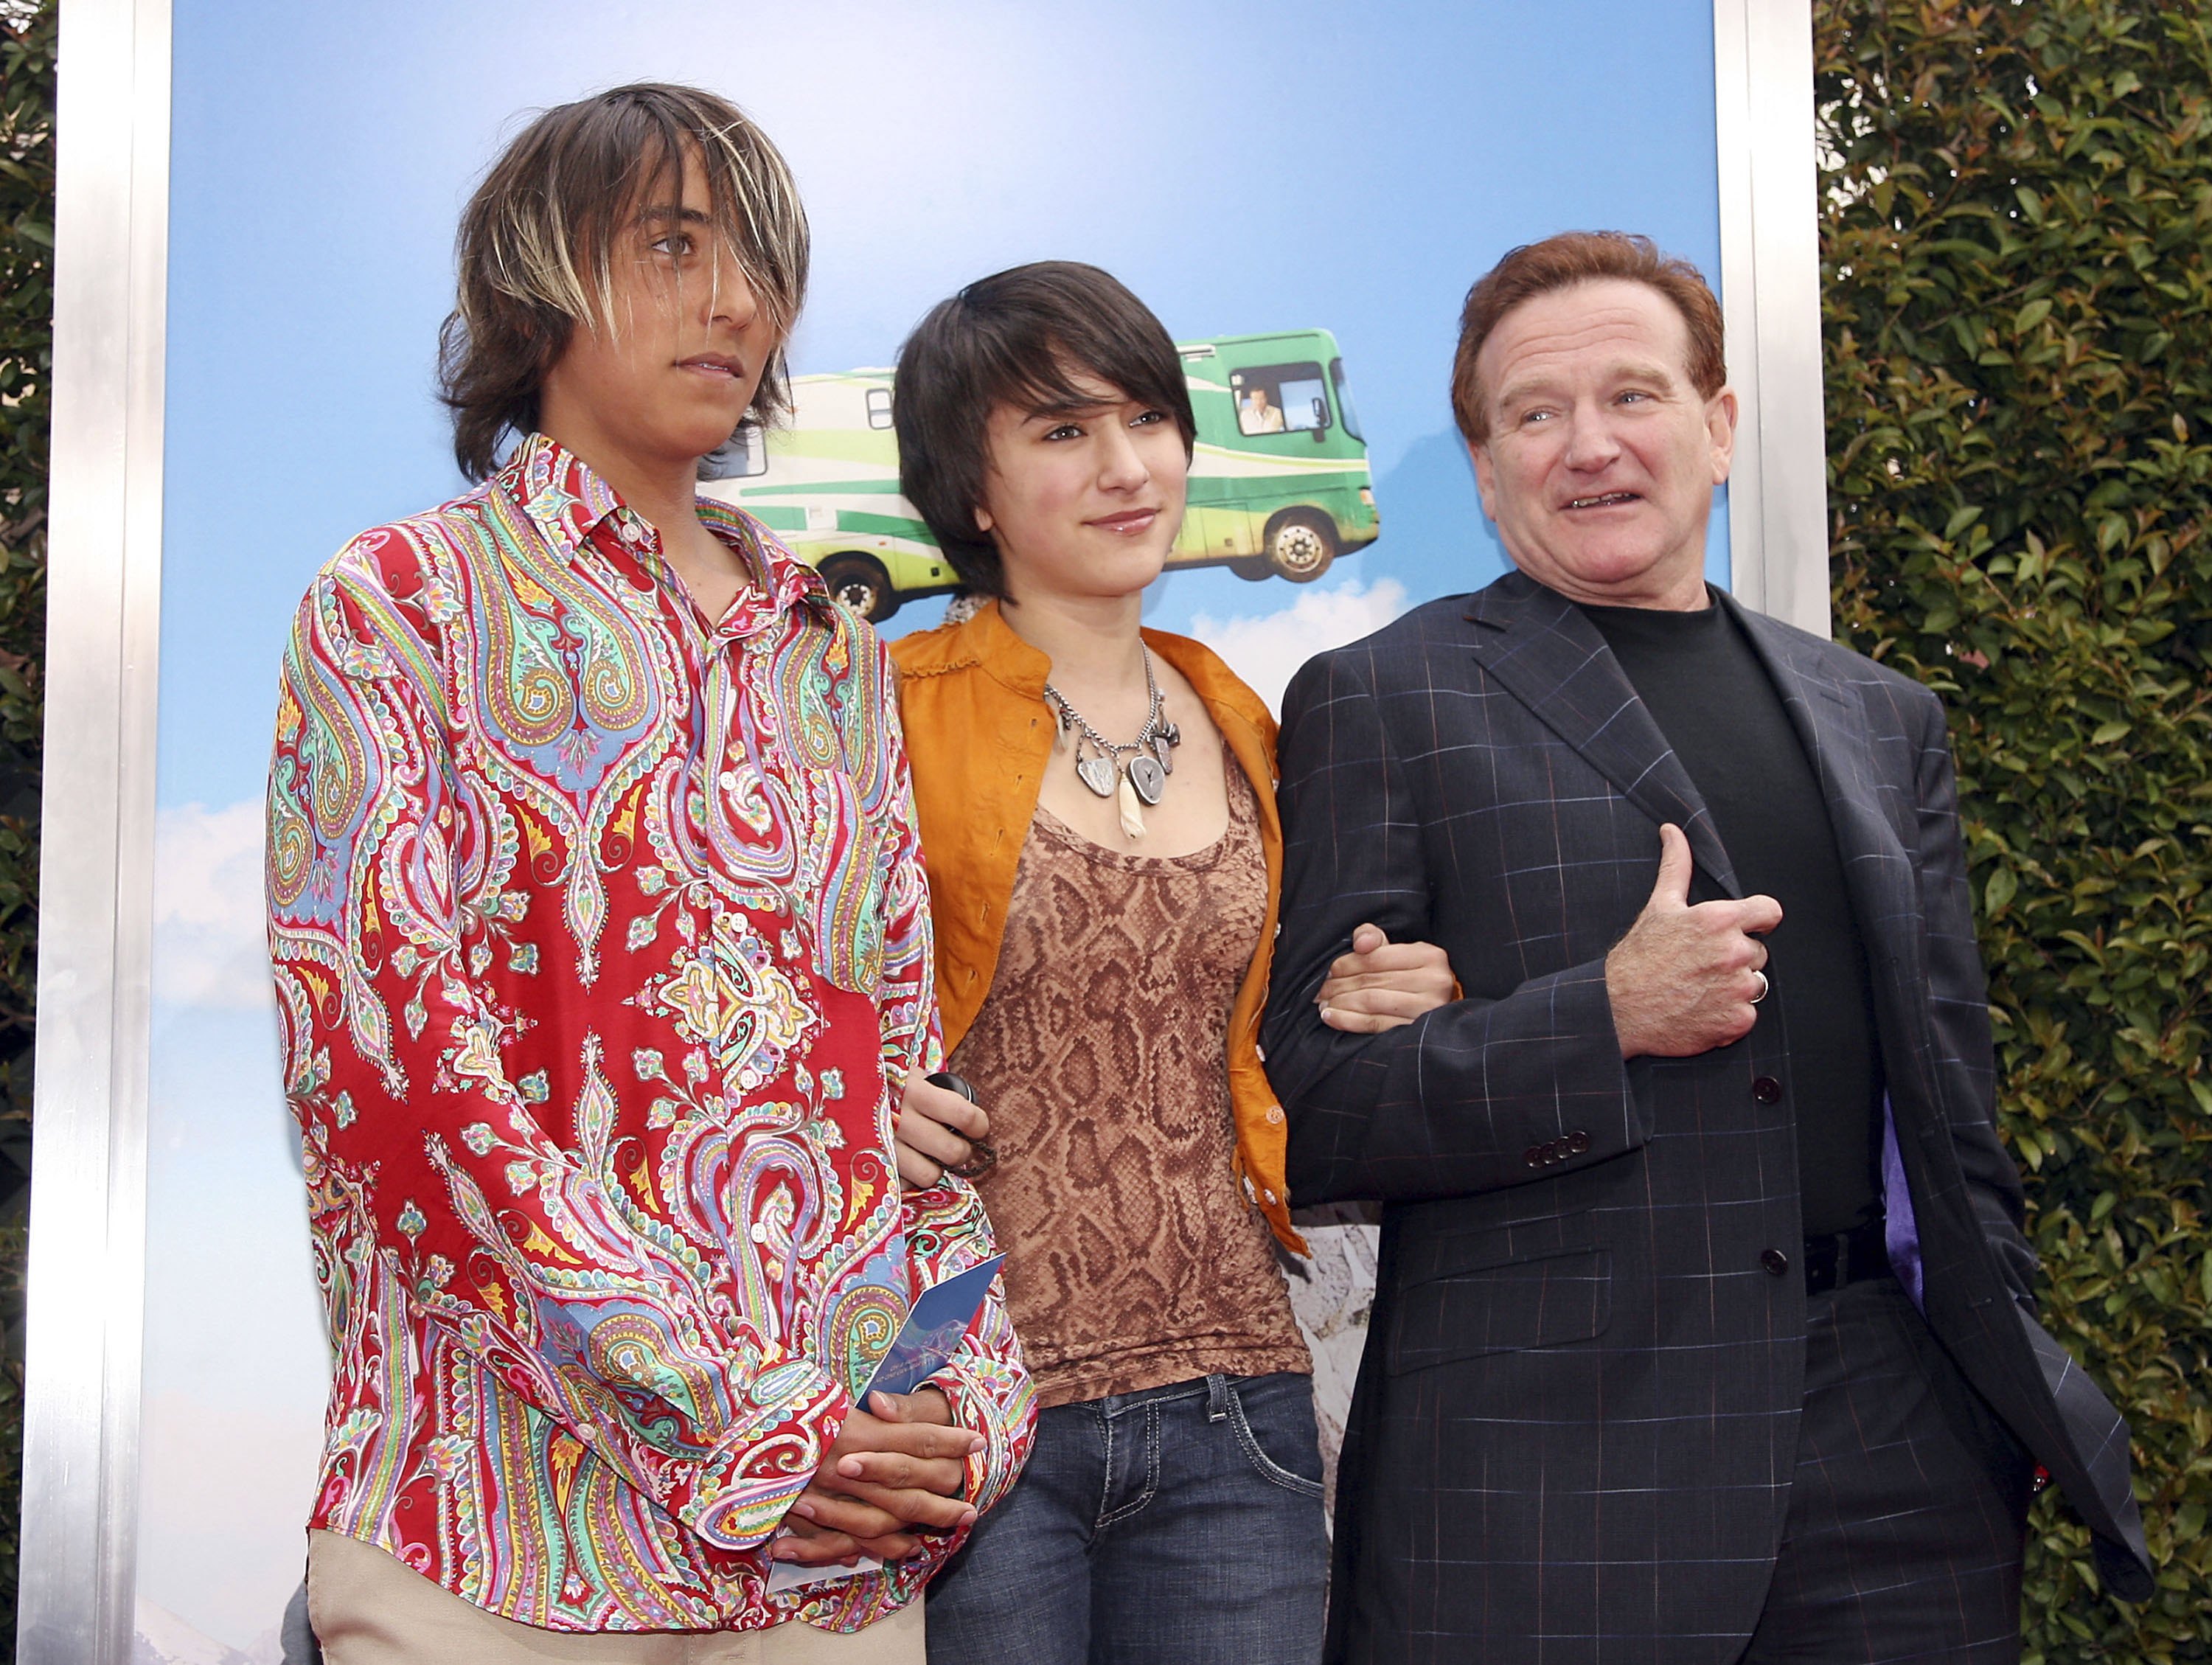 Actor Robin Williams (R) and his son Cody (L) and daughter Zelda  at the Village Theater on April 23, 2006, in Los Angeles, California. | Source: Getty Images